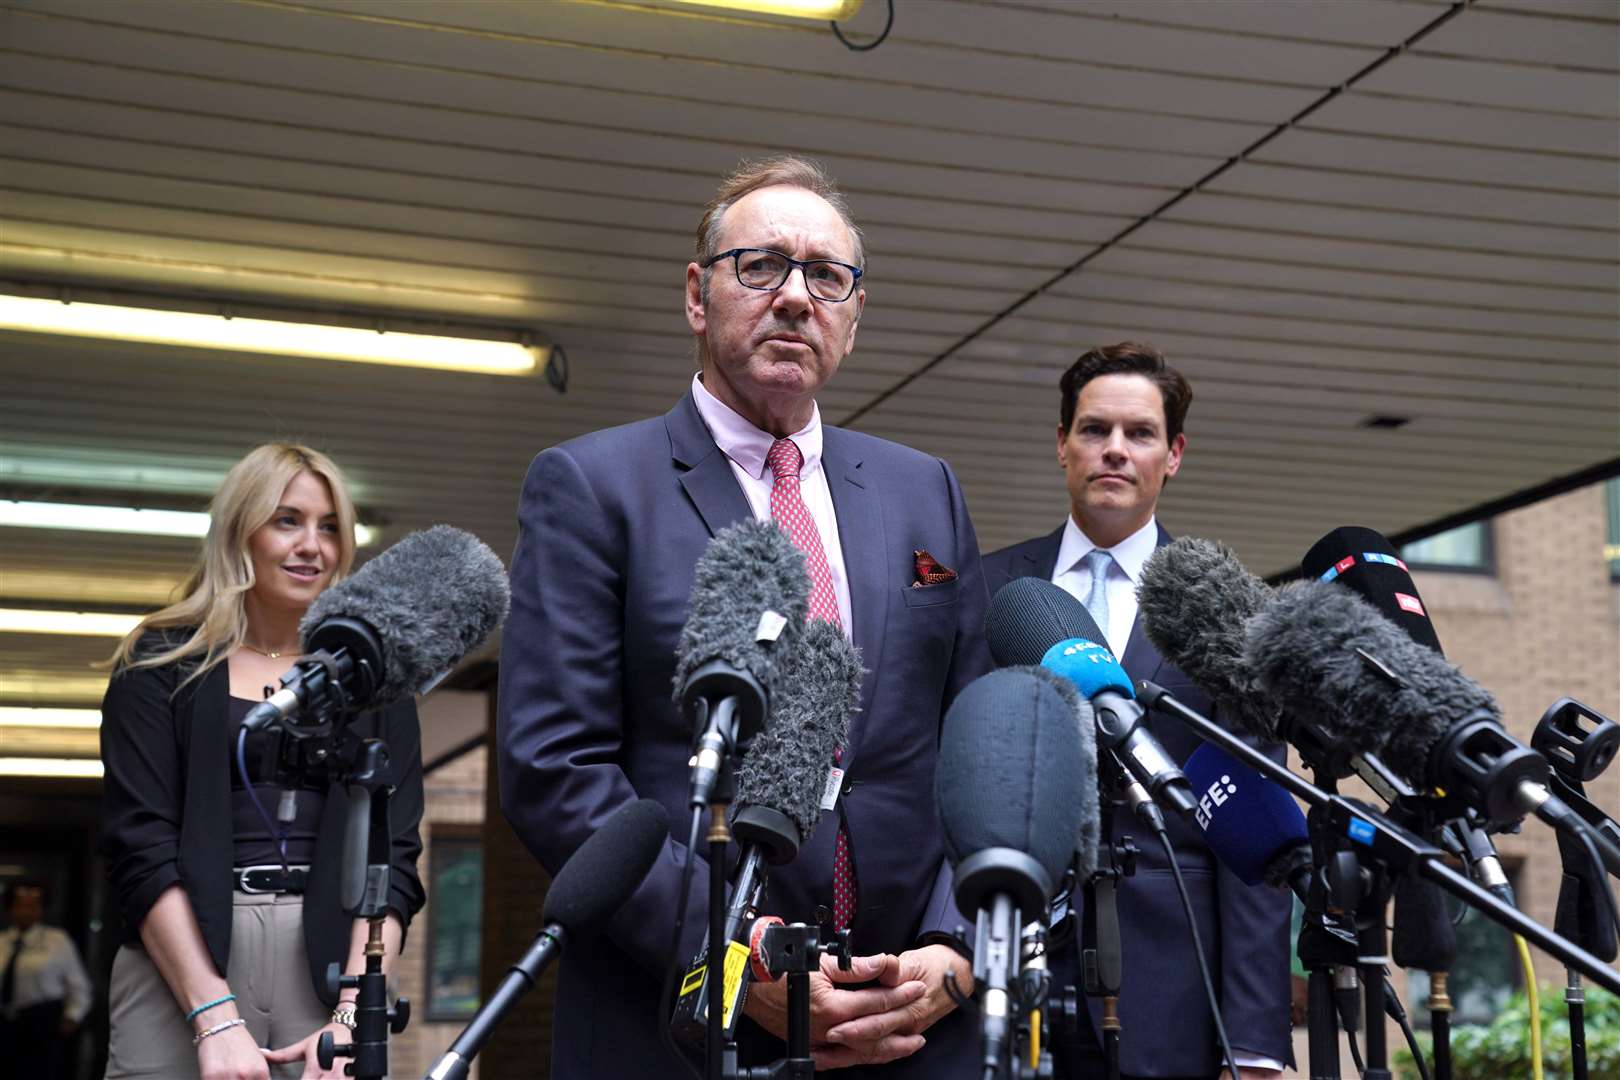 Actor Kevin Spacey speaks to the media outside Southwark Crown Court after he was found not guilty of sexually assaulting four men (Lucy North/PA)